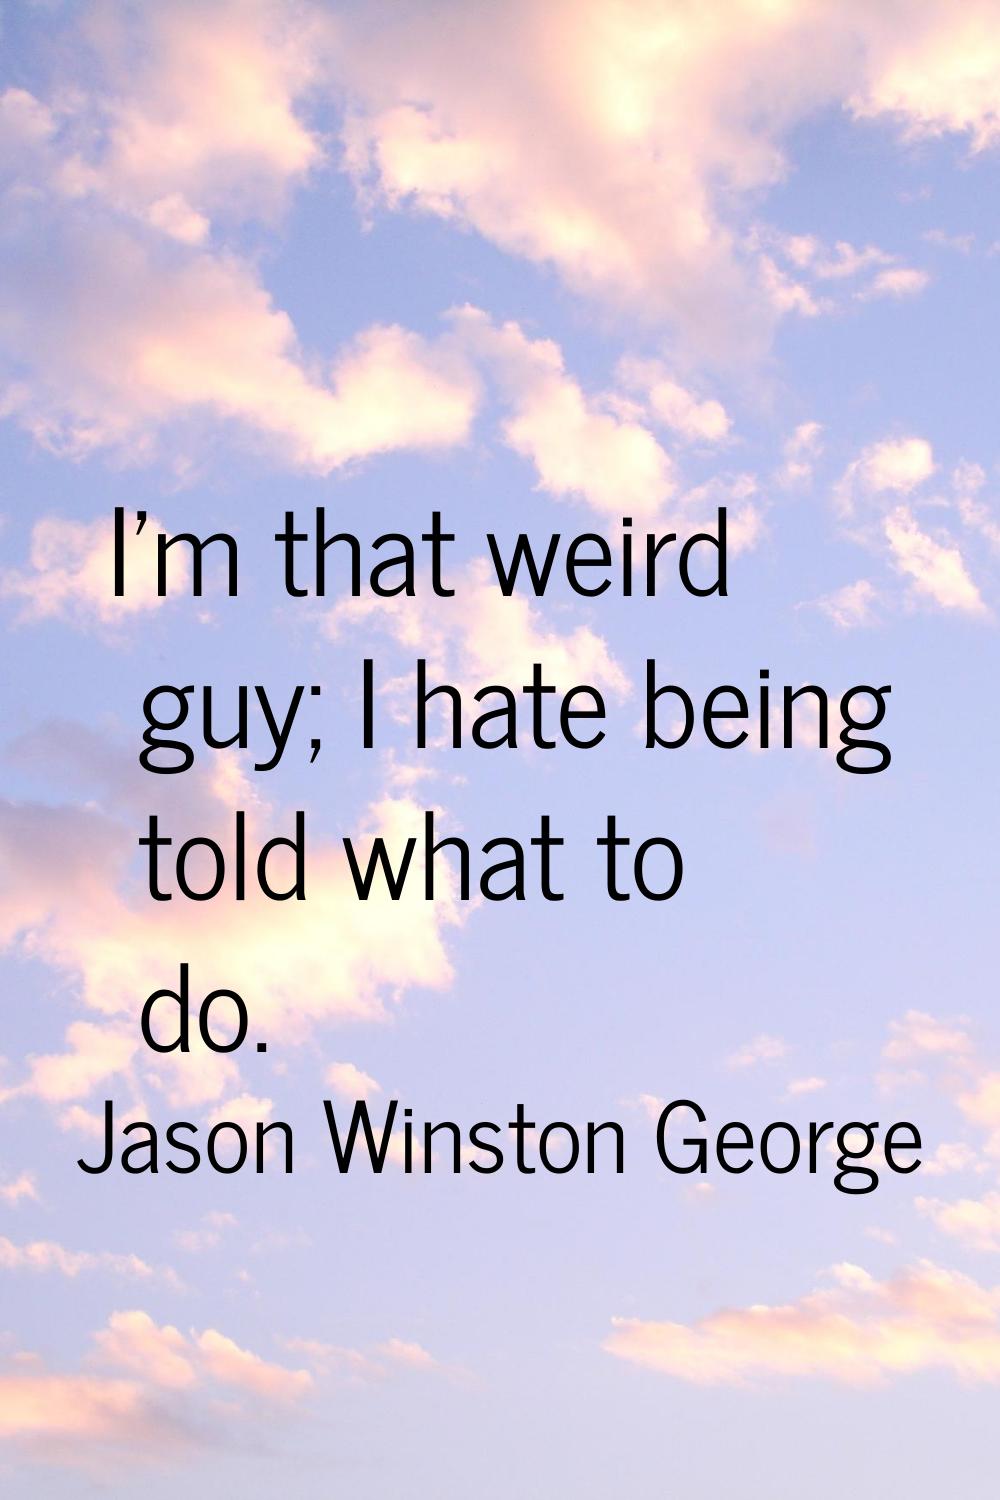 I'm that weird guy; I hate being told what to do.